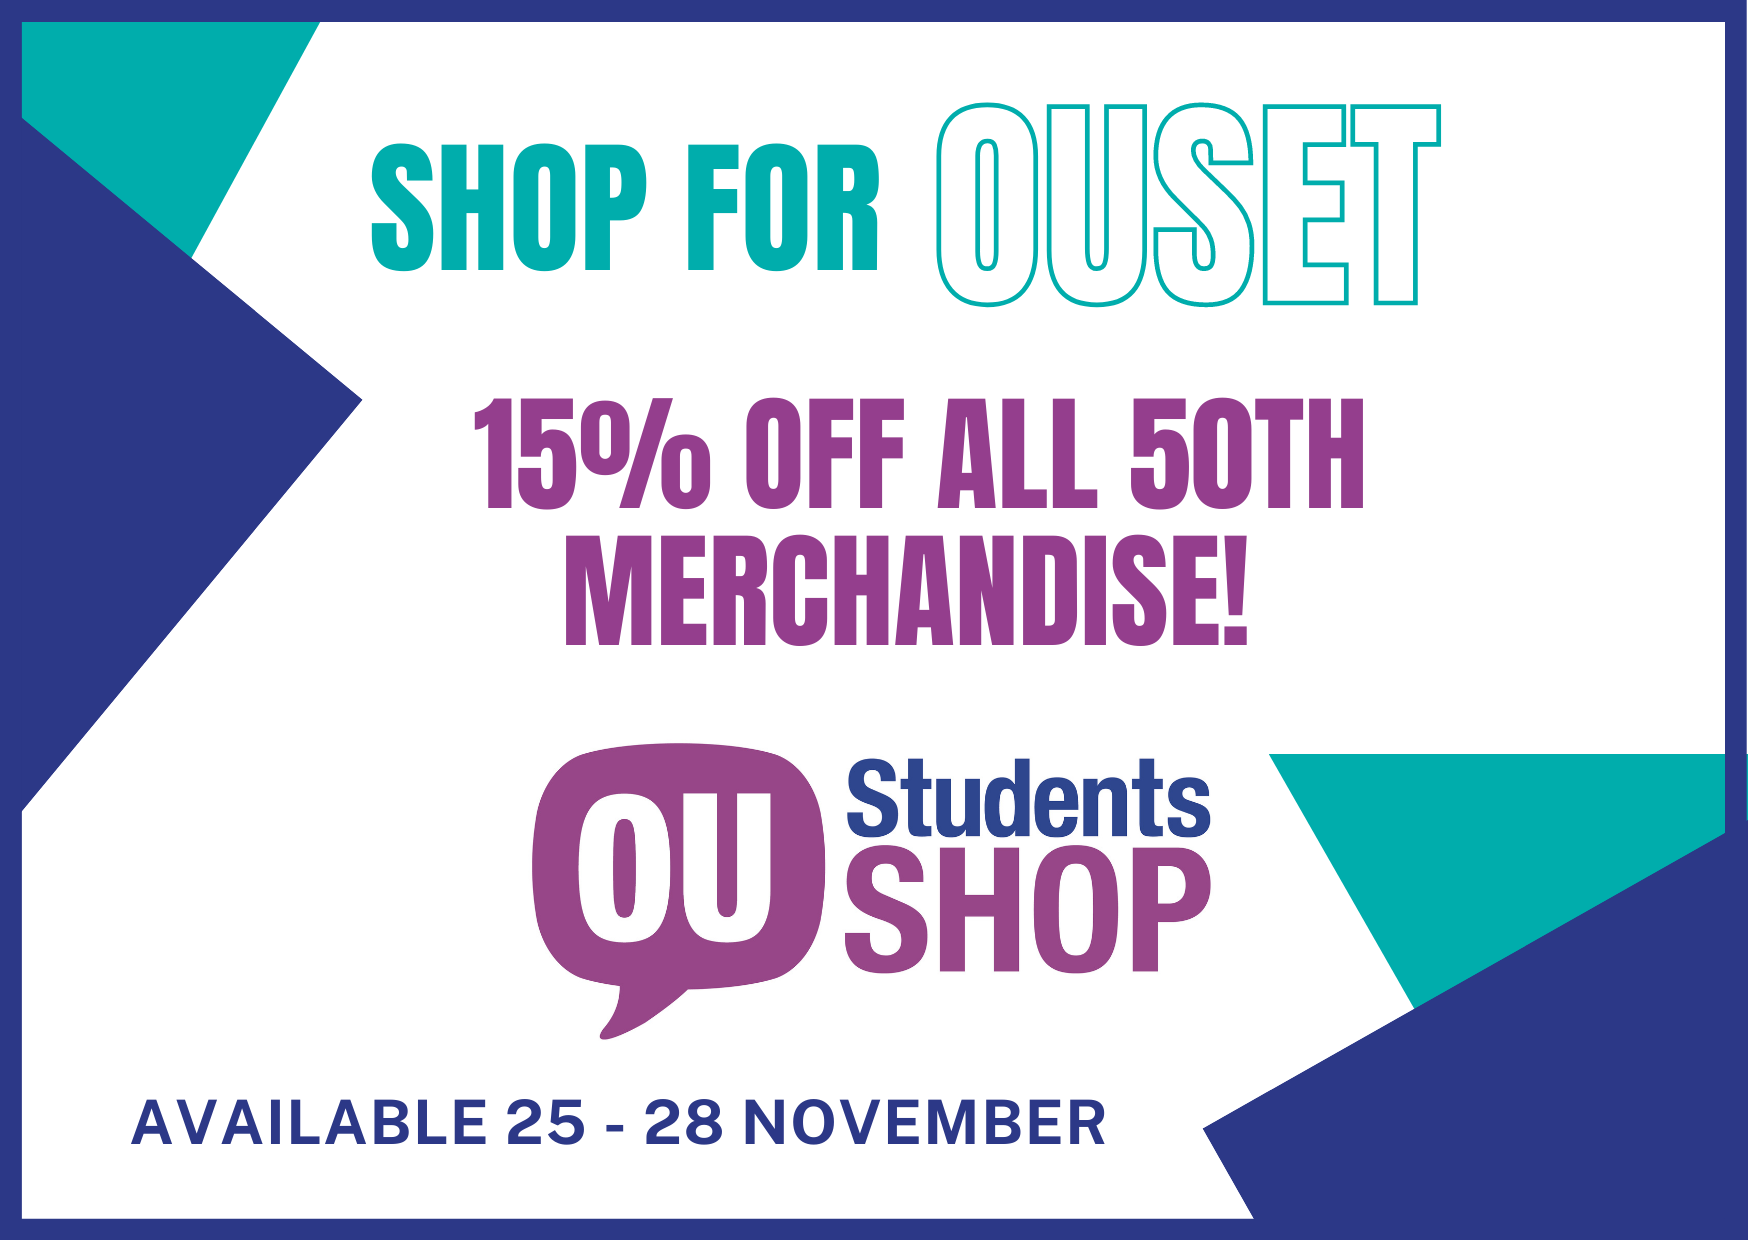 Shop for OUSET. 15 percent off all 50th merchandise